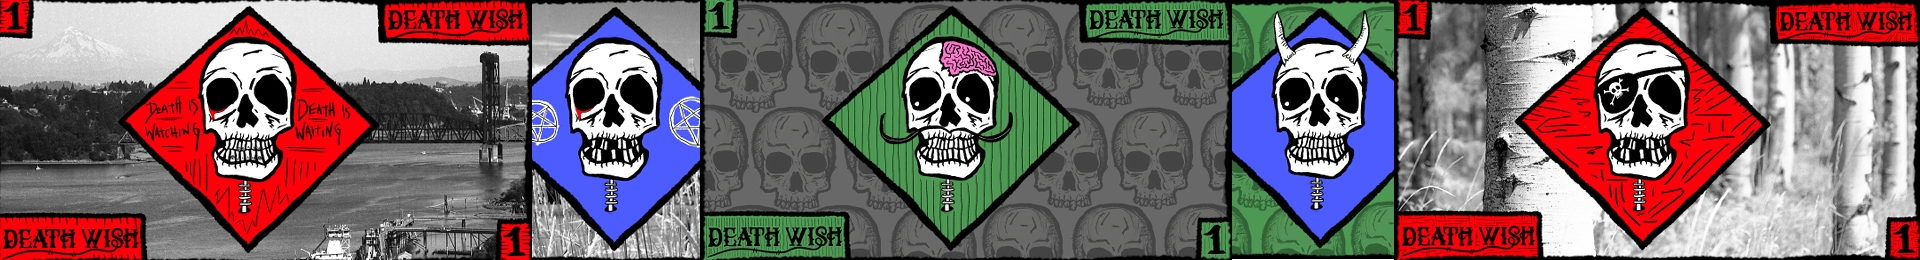 Project Death Wish banner